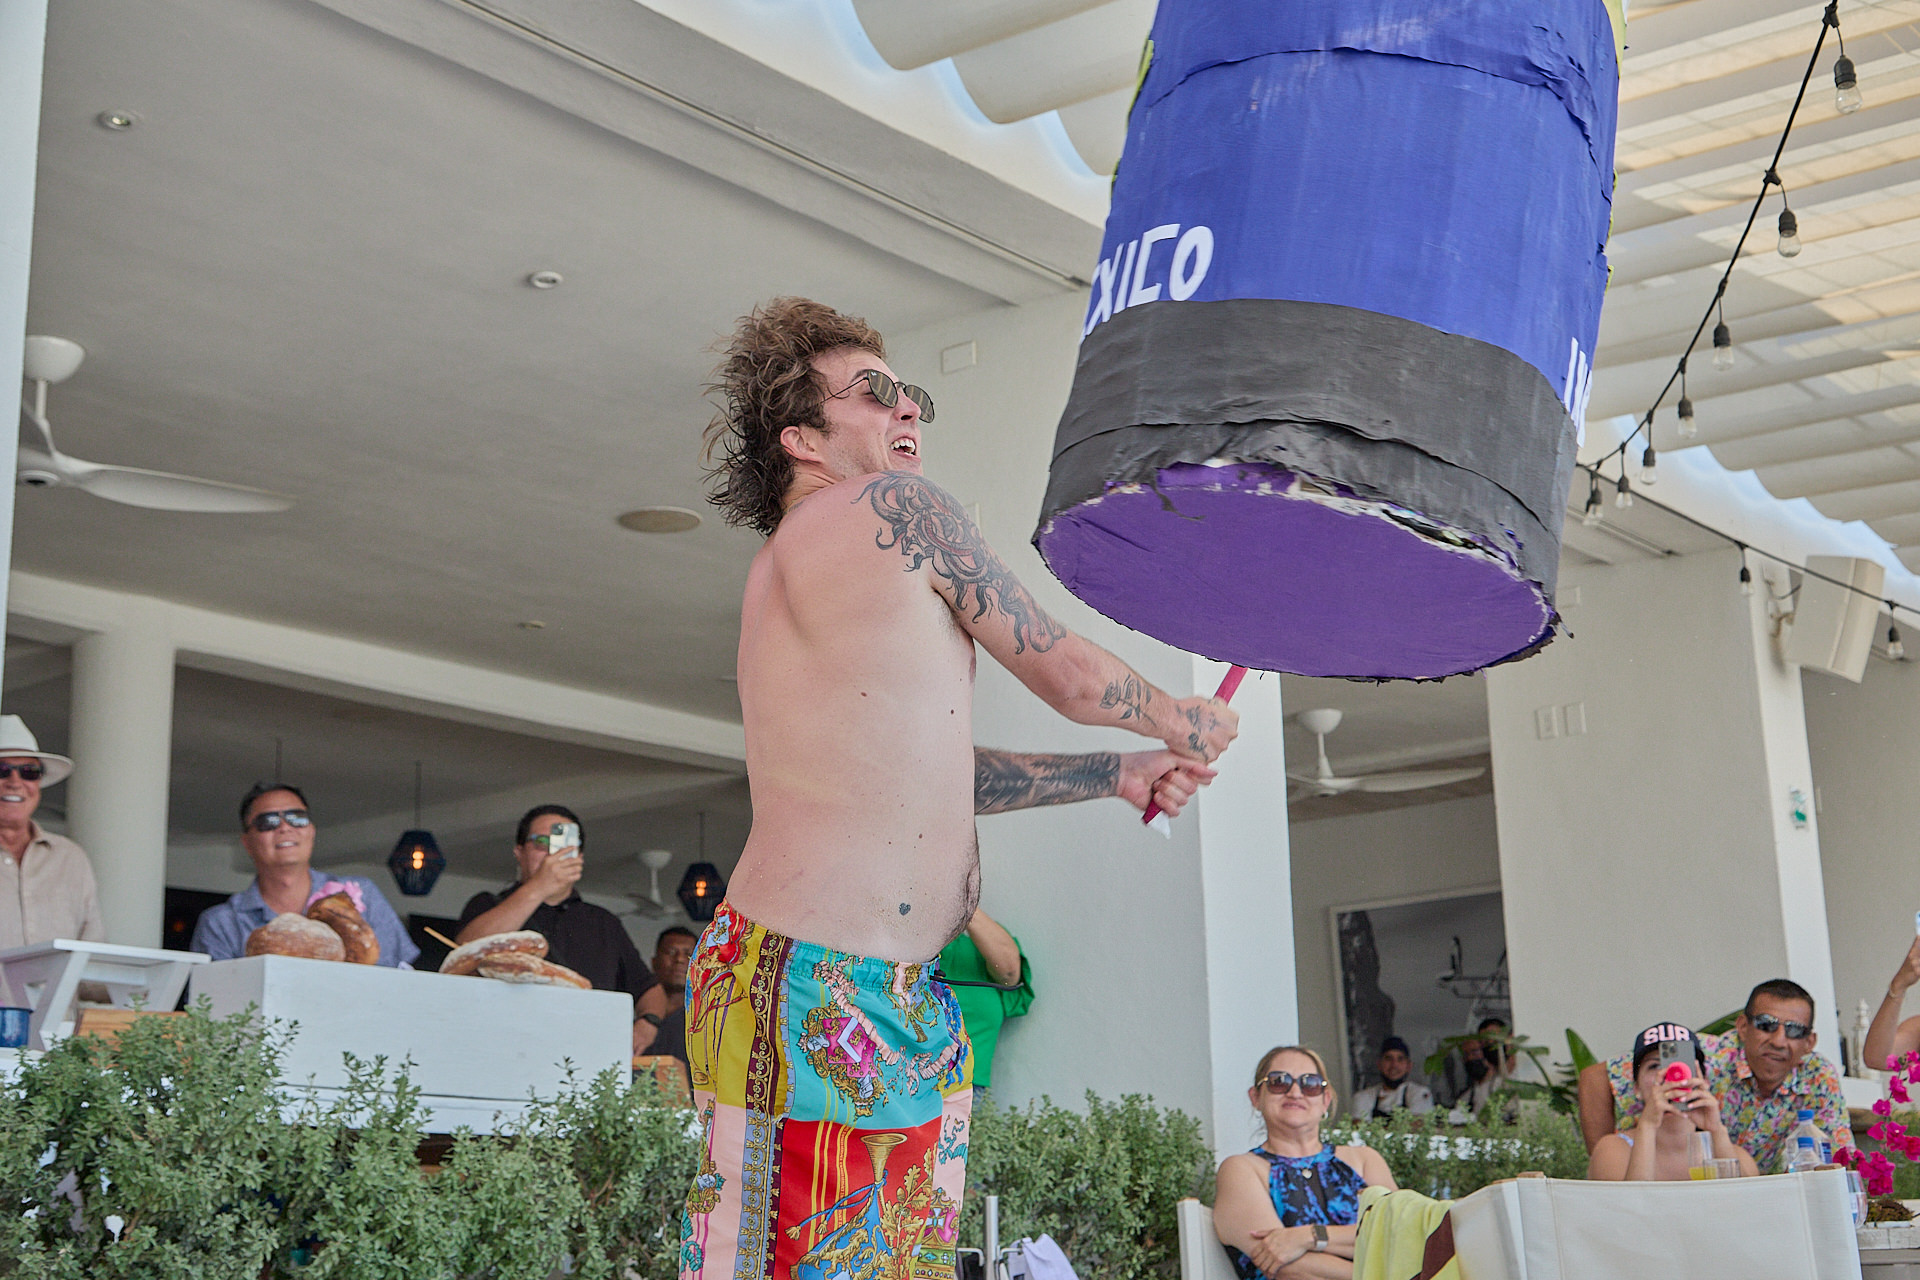 a man holding a giant purple object in his hand.